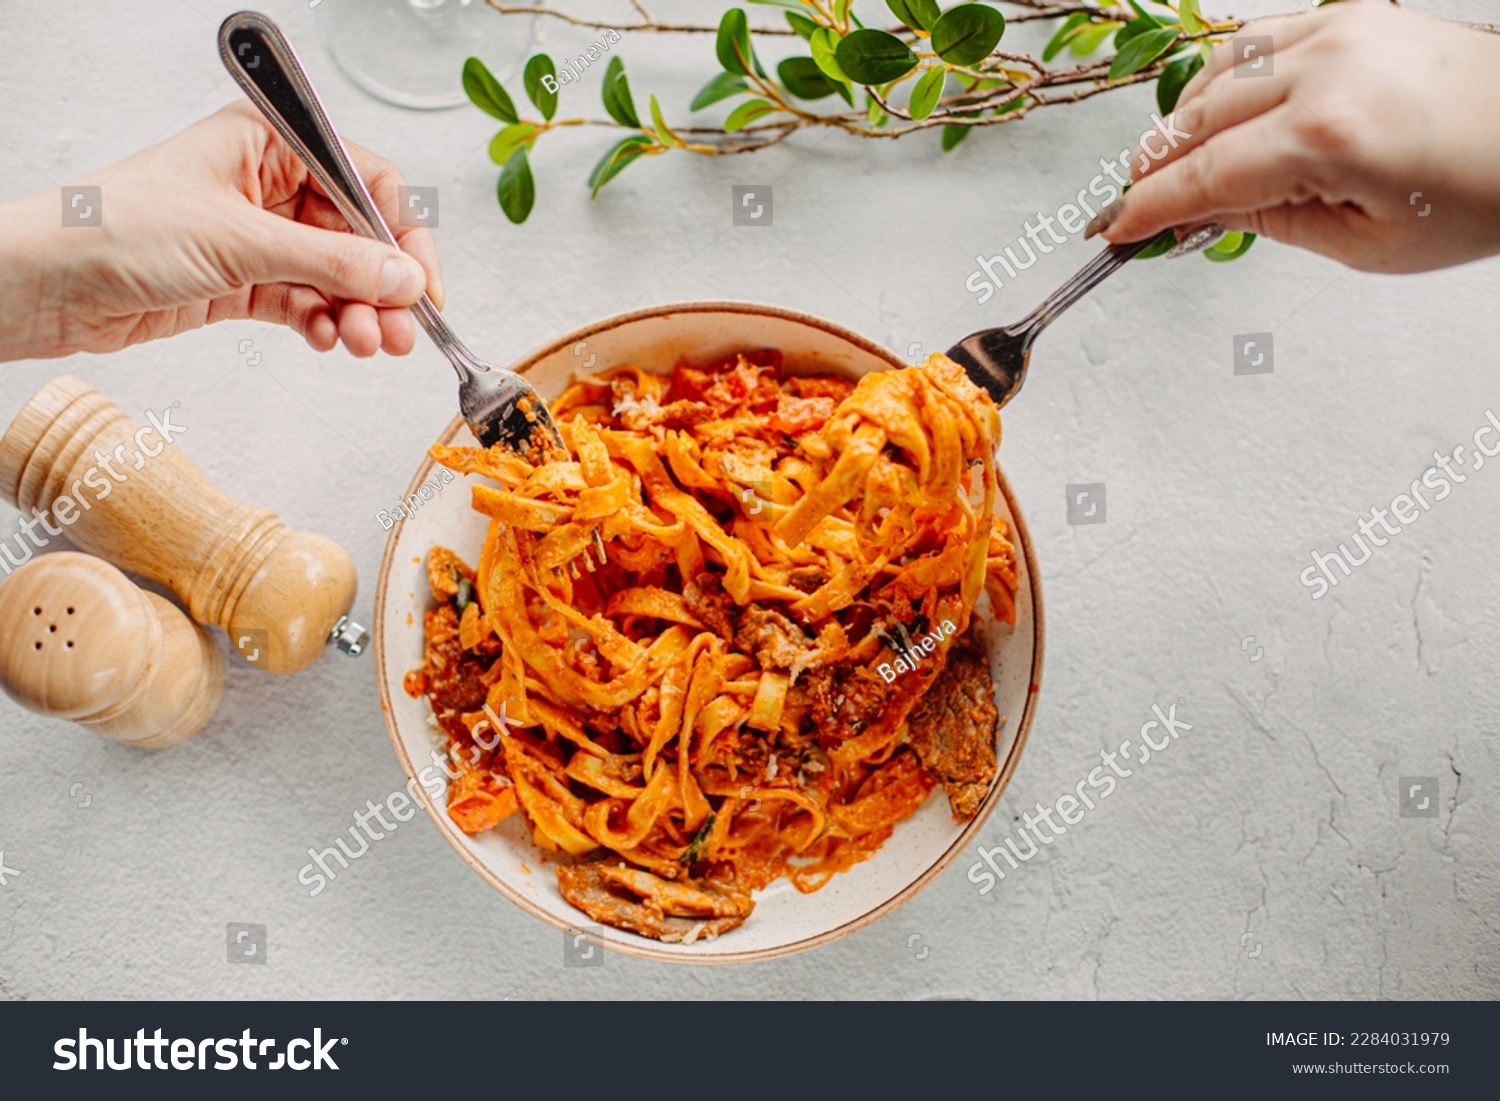 Italian pasta, tomato sauce. Two female hands in the frame, girls eat pasta, hold forks in their hands, top view, Italian cuisine. #2284031979